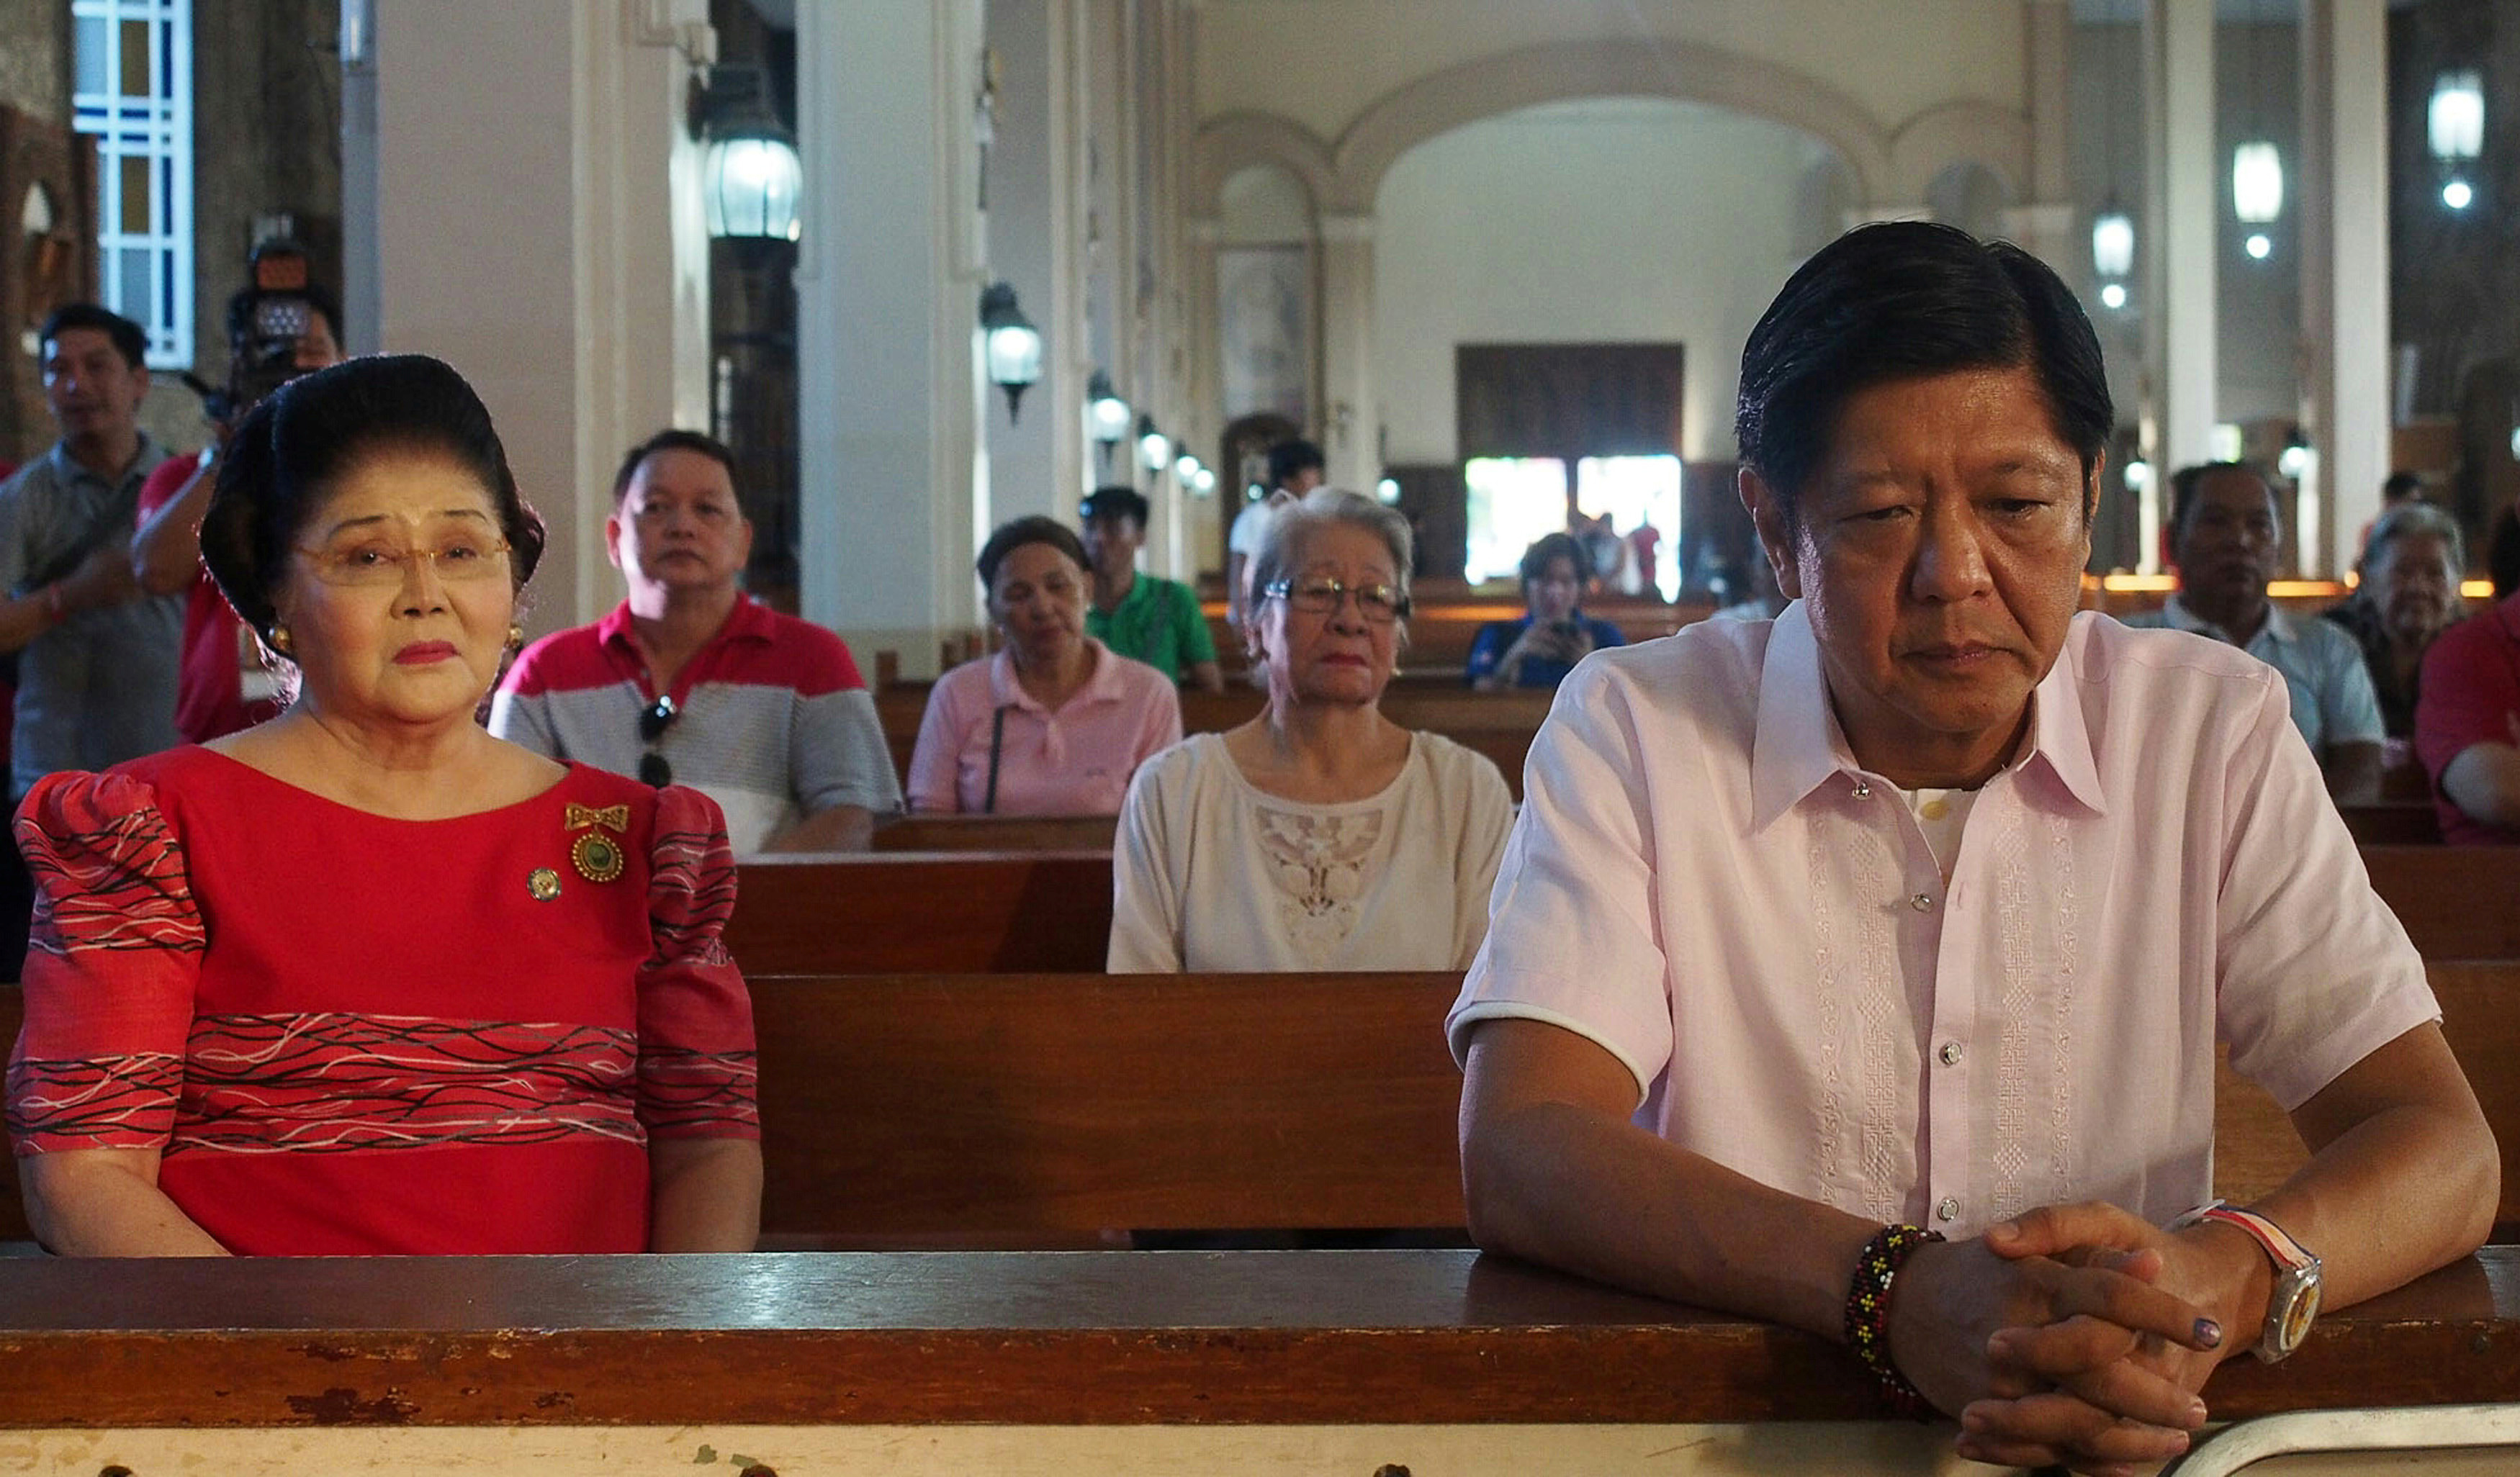 Philippine vice-presidential candidate Ferdinand "Bongbong" Marcos, attends a mass with his mother, former First Lady Imelda Marcos, in the Philippine town of Batac, in Ilocos Norte province, on May 9, 2016 (Reuters)